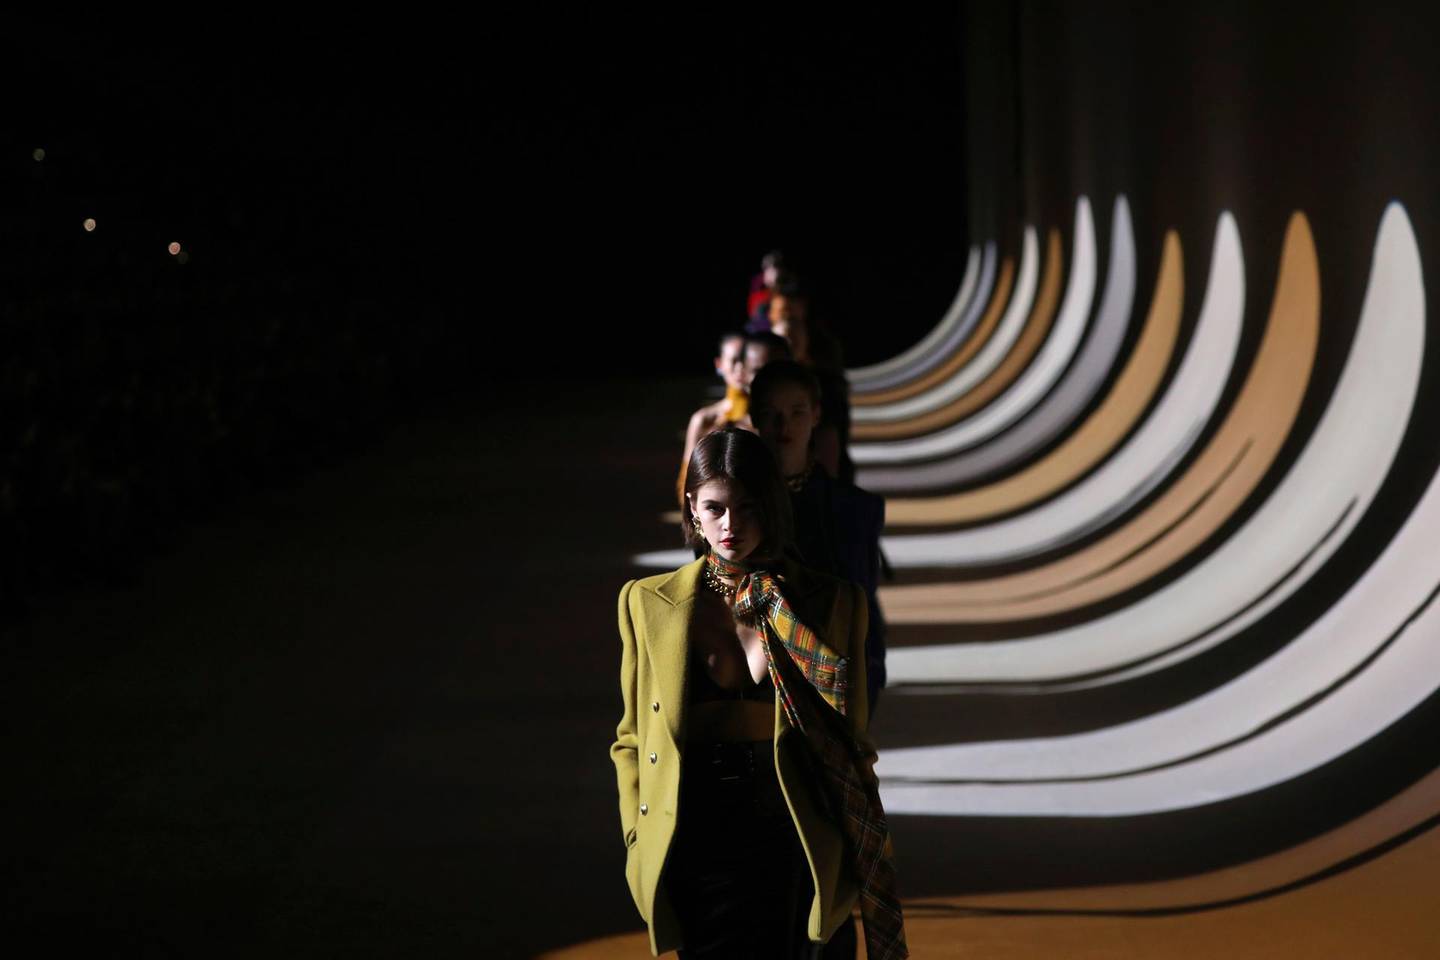 FILE - In this Feb.25, 2020 file photo, model Kaia Gerber leads other models as they wear creations for the Saint Laurent fashion collection during Women's fashion week Fall/Winter 2020/21 presented in Paris. Gucci and St. Laurent are two of the highest profile fashion houses to announce they will leave the fashion calendar behind, with its relentless four-times a year rhythm, shuttling cadres of fashionistas to global capitals where they squeeze shoulder-to-shoulder around runways for 15 breathless minutes. The coronavirus lockdown -- which has hit luxury fashion houses on their bottom lines -- has also given pause to rethink the pace of fashion. (Photo by Vianney Le Caer/Invision/AP, File)